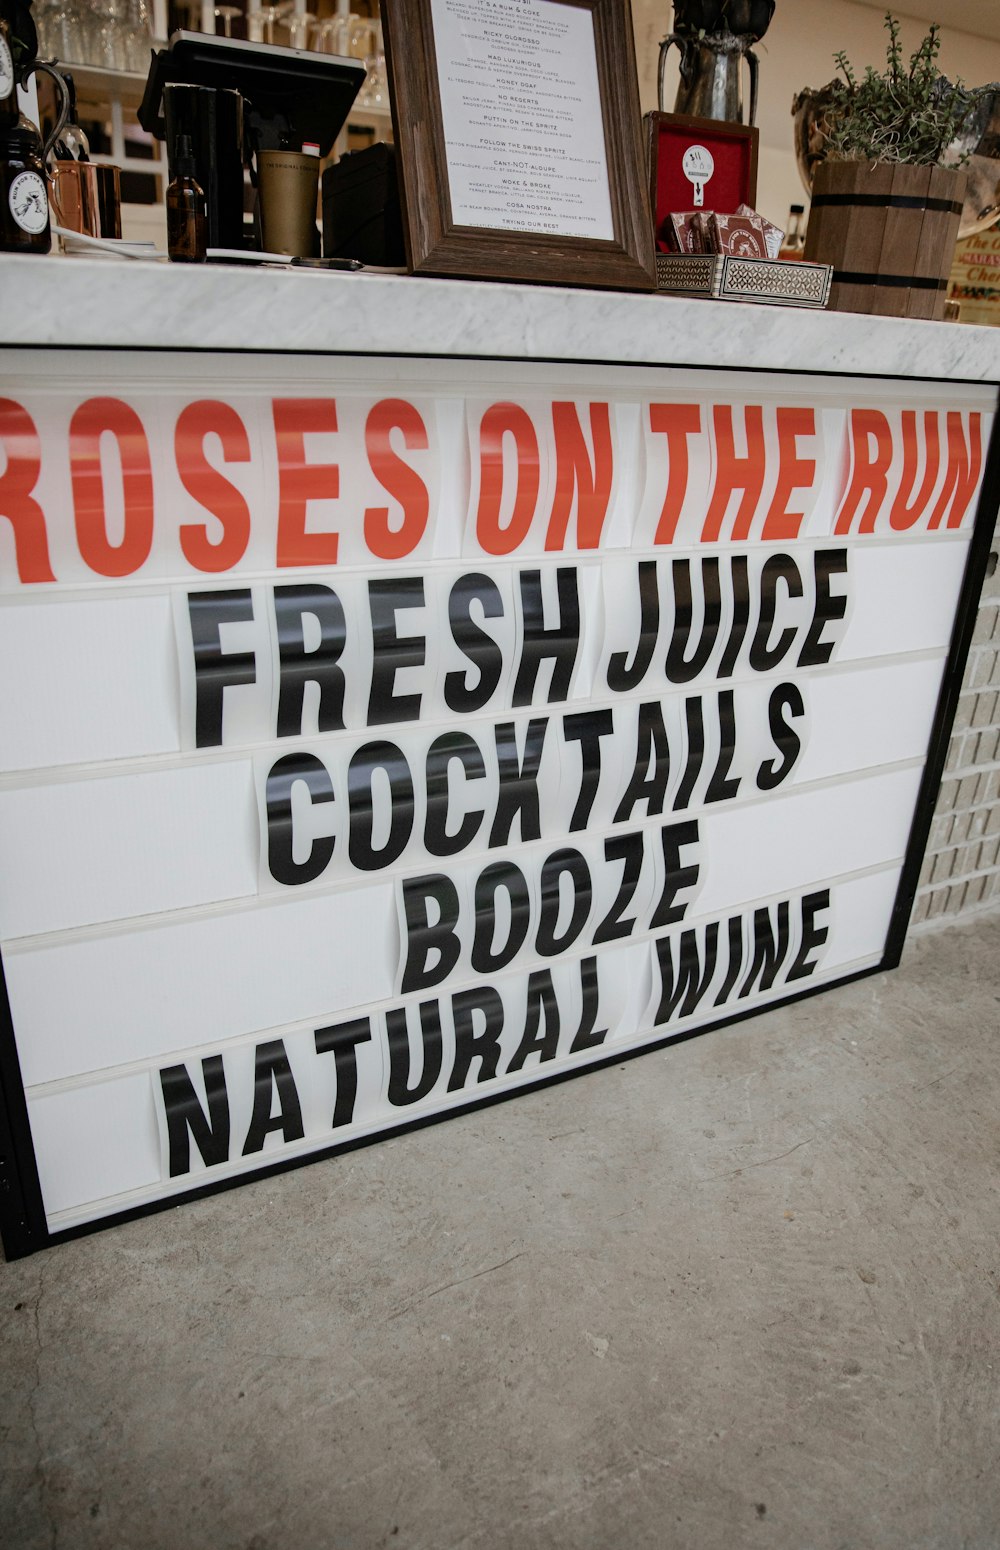 a sign that says roses on the run fresh juice cocktails booze natural wine